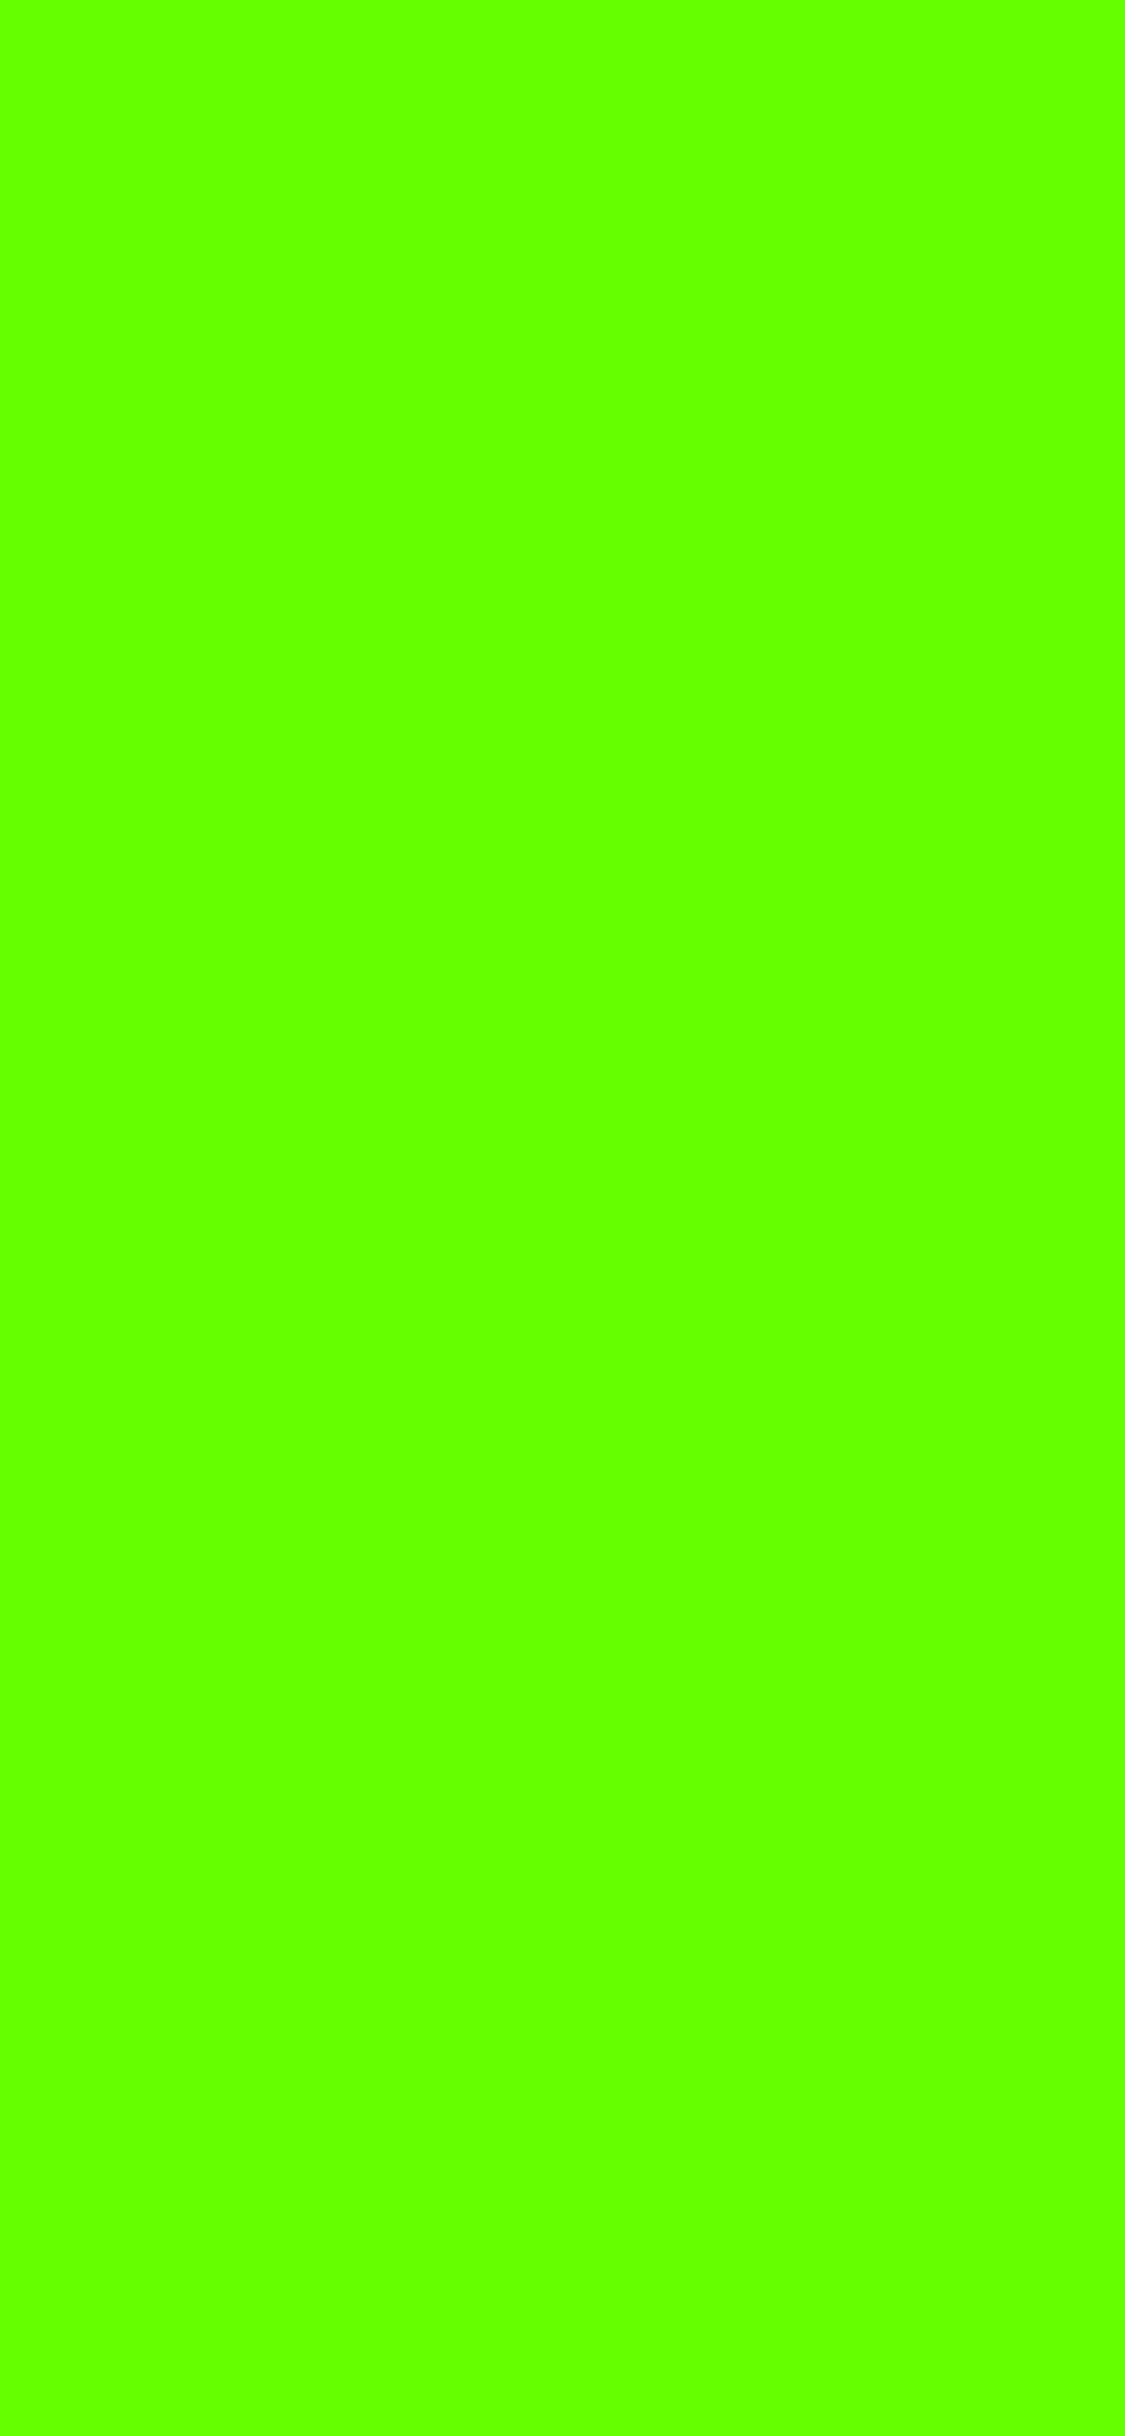 1125x2436 Bright Green Solid Color Background